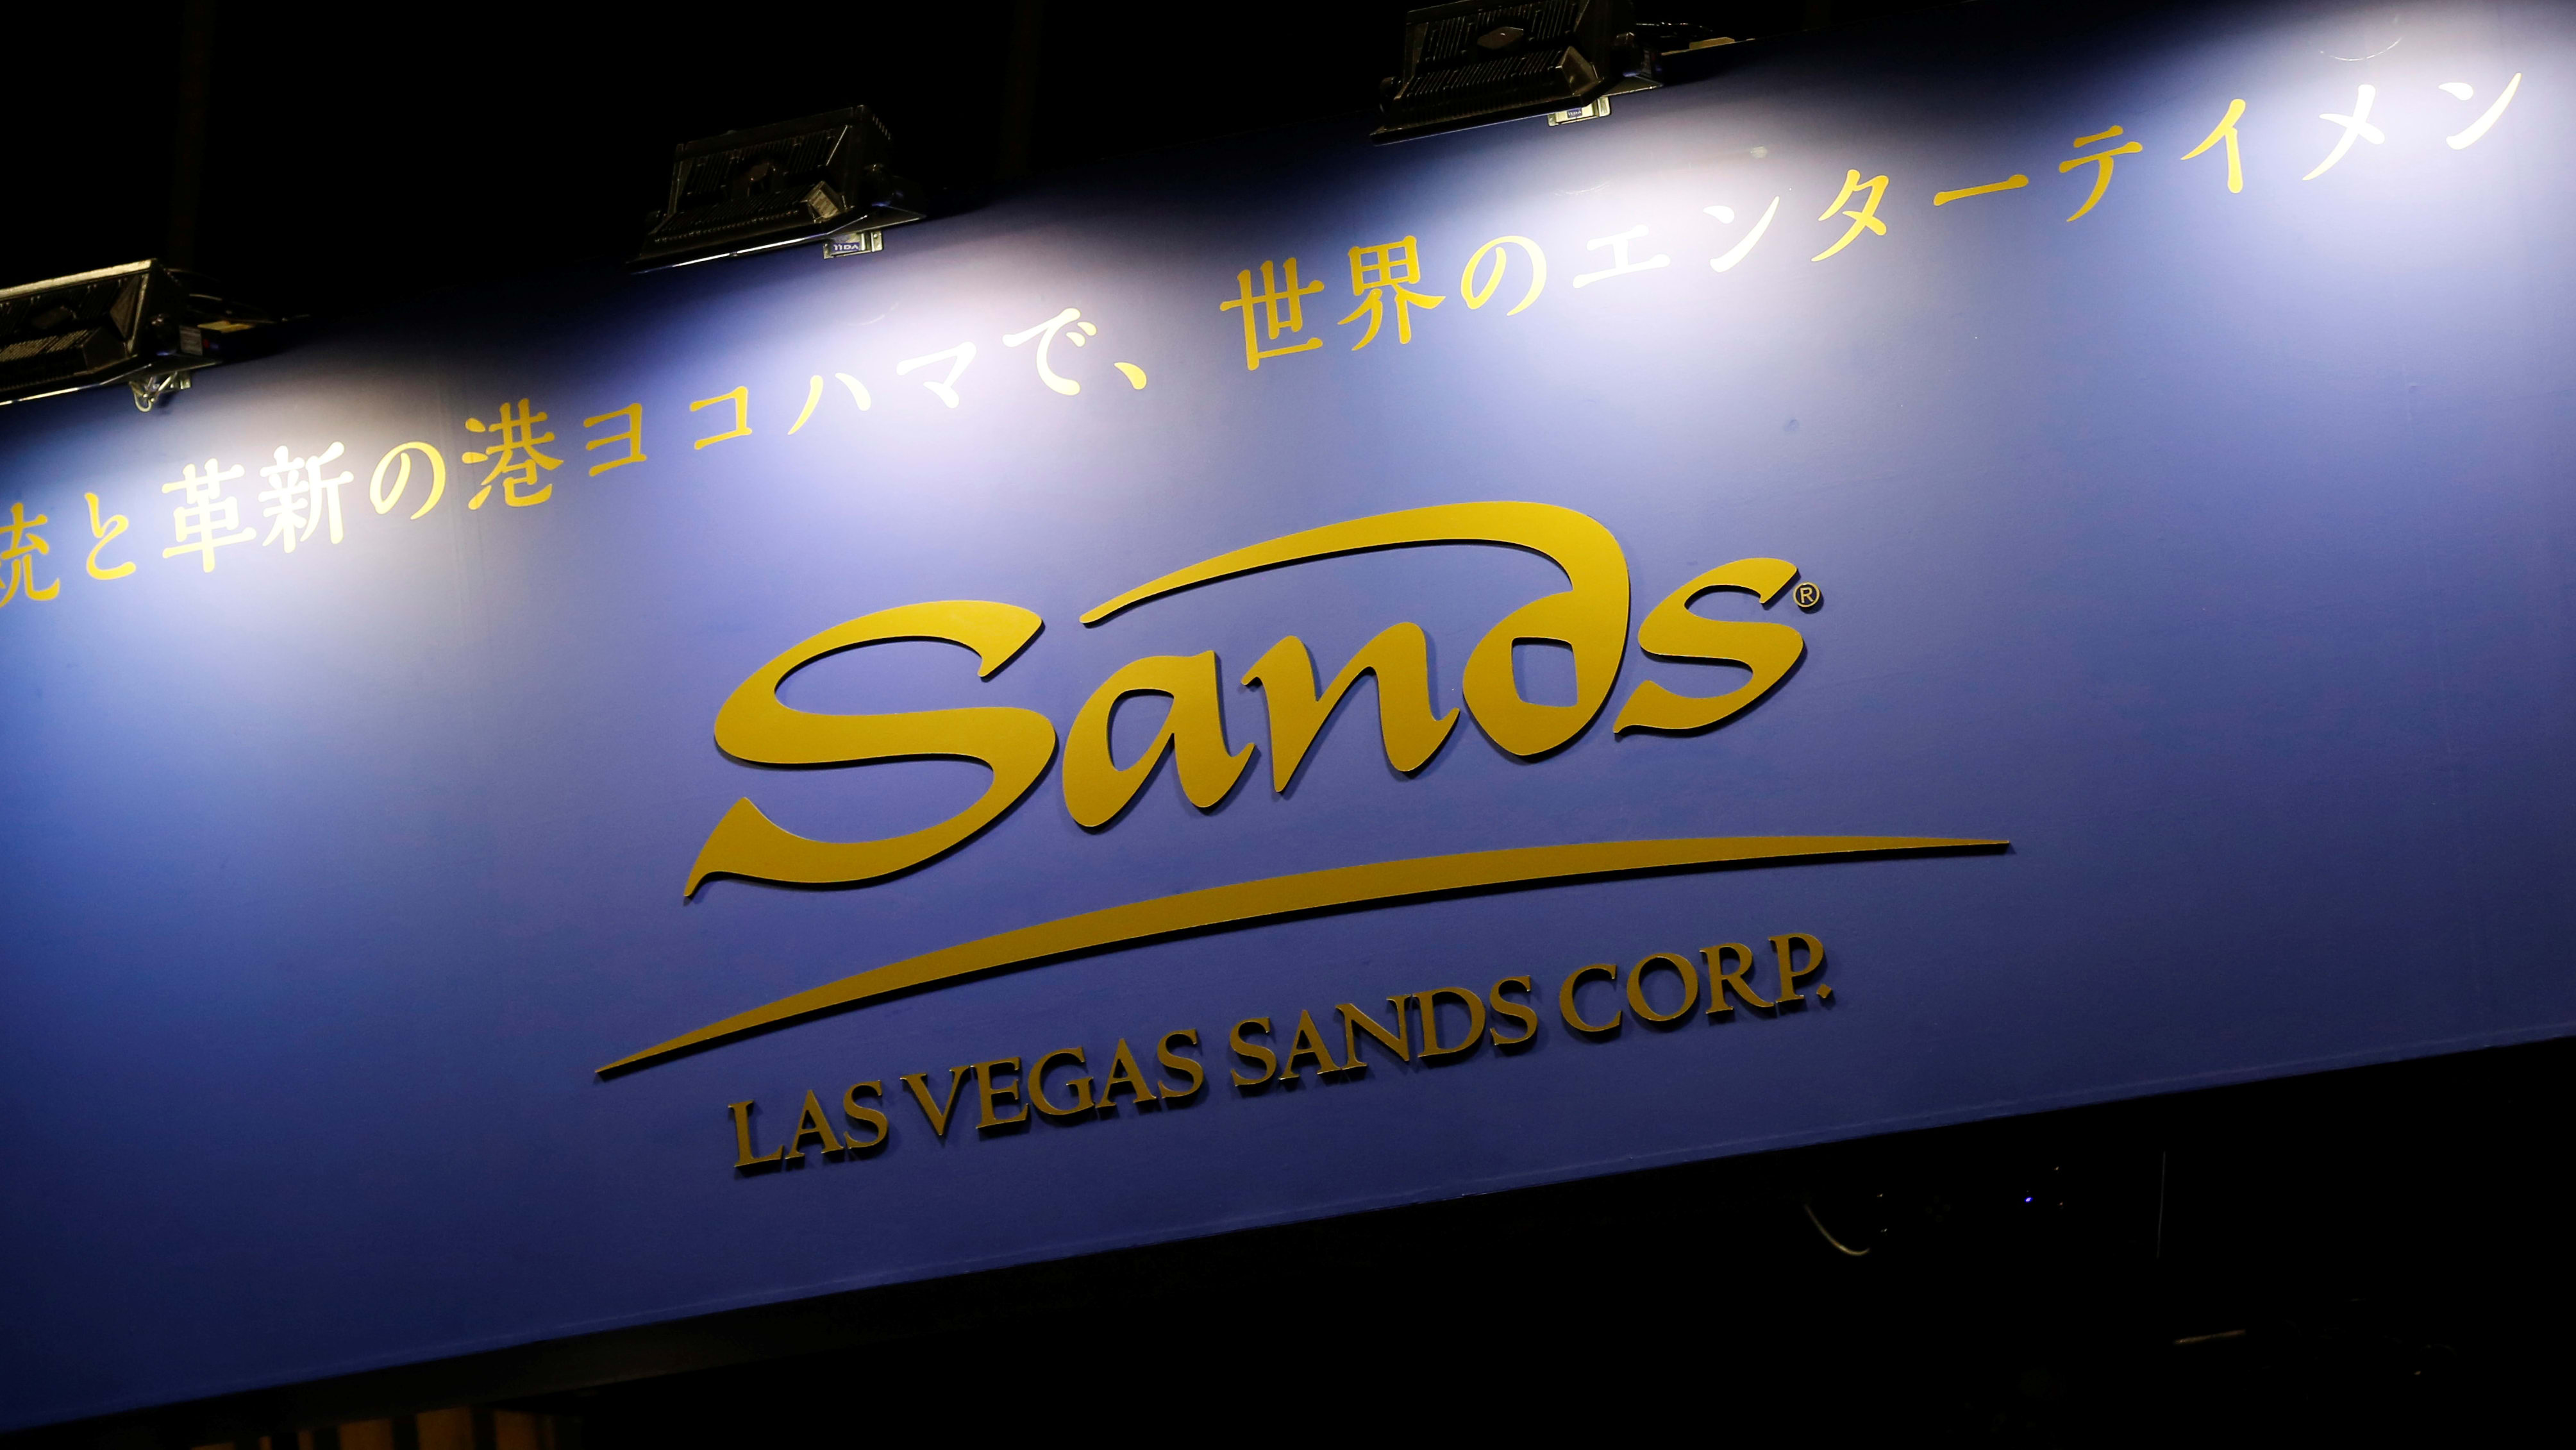 Las Vegas Sands sees many strategic opportunities for the company due to  our financial strength